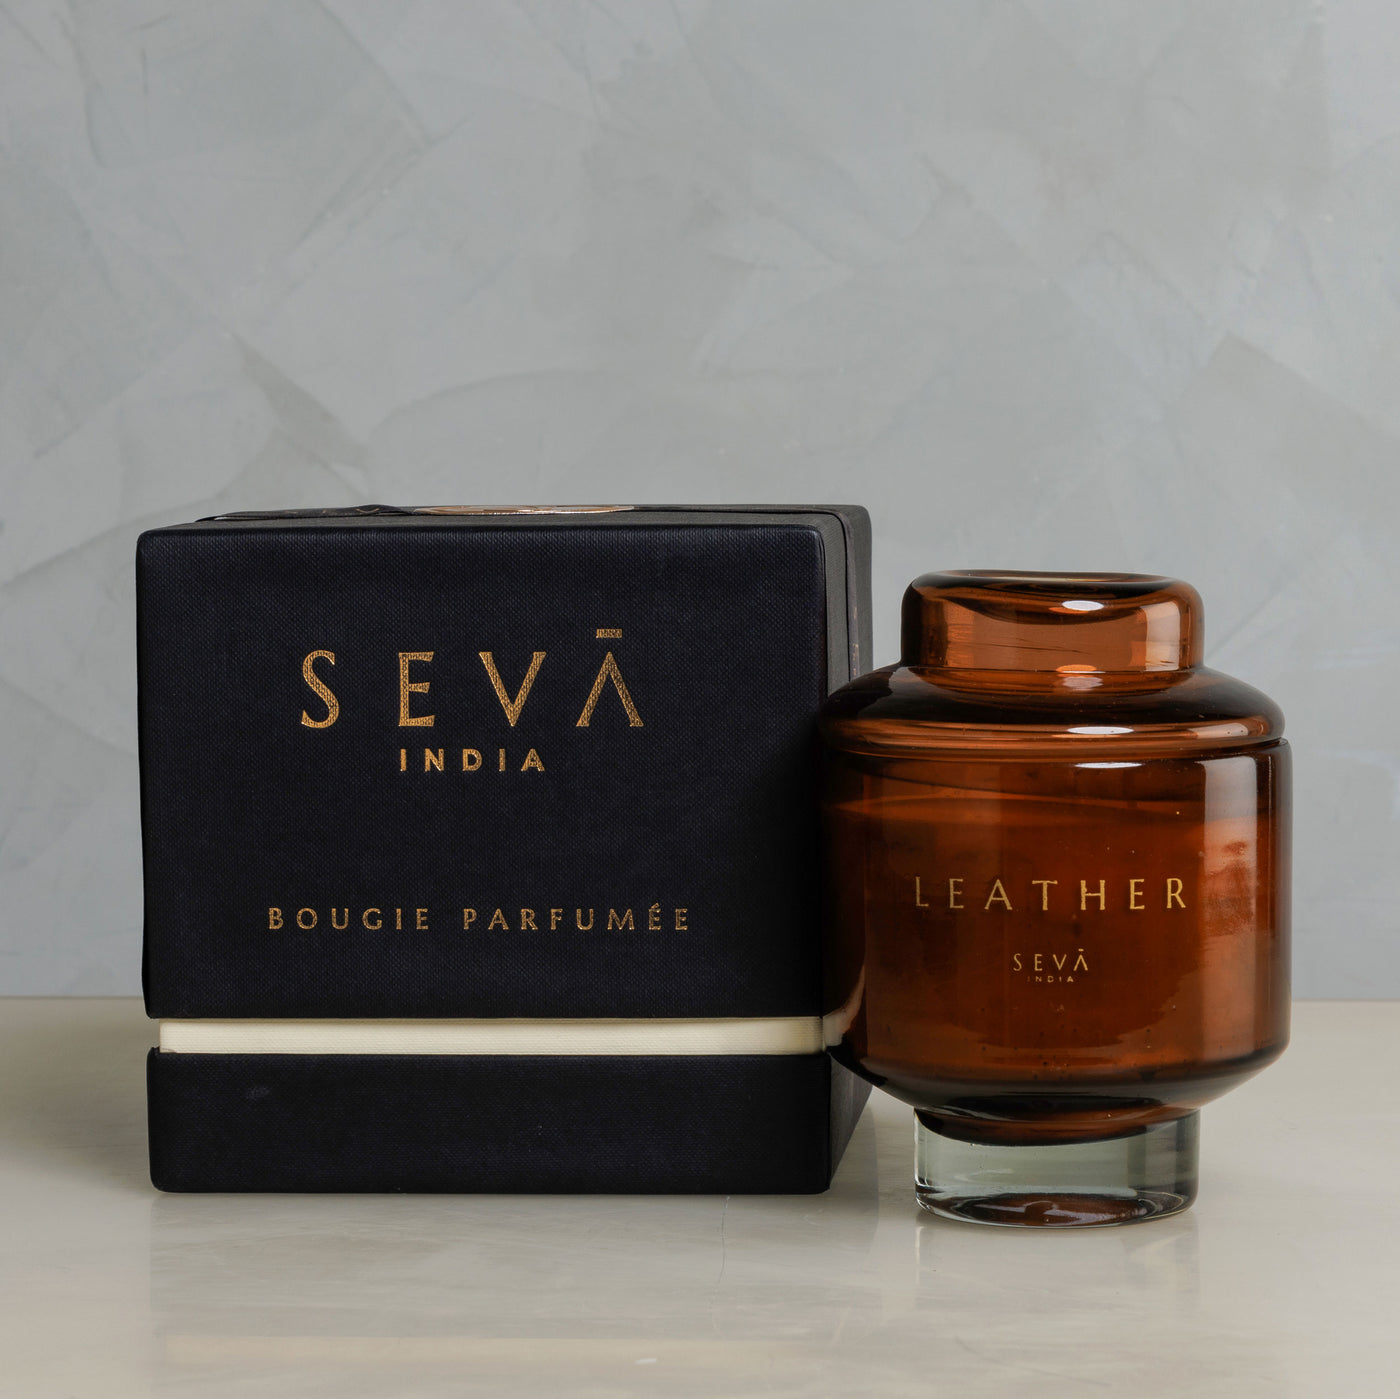 SEVA INDIA Leather Petite Soy Candle in Brown Tinted Glass